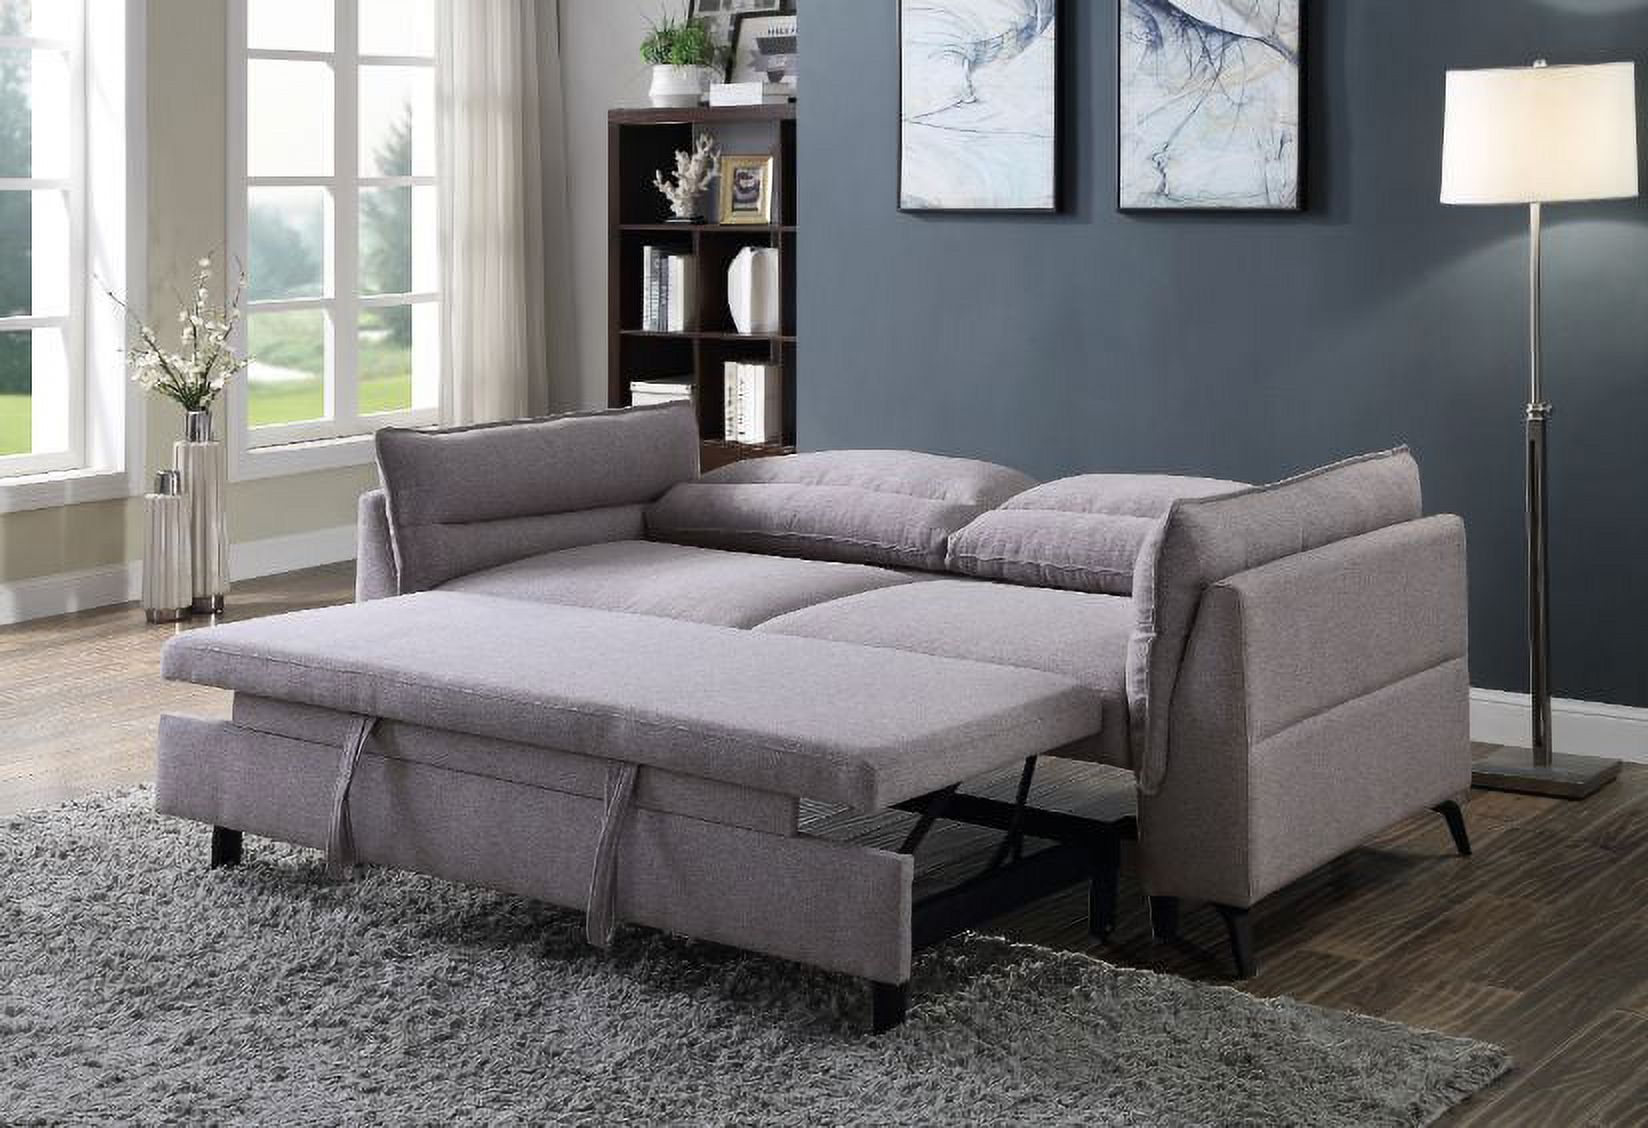 Gray Contemporary Living Room Furniture Pull-out Sleeper Sofa Built in USB Port - image 1 of 3